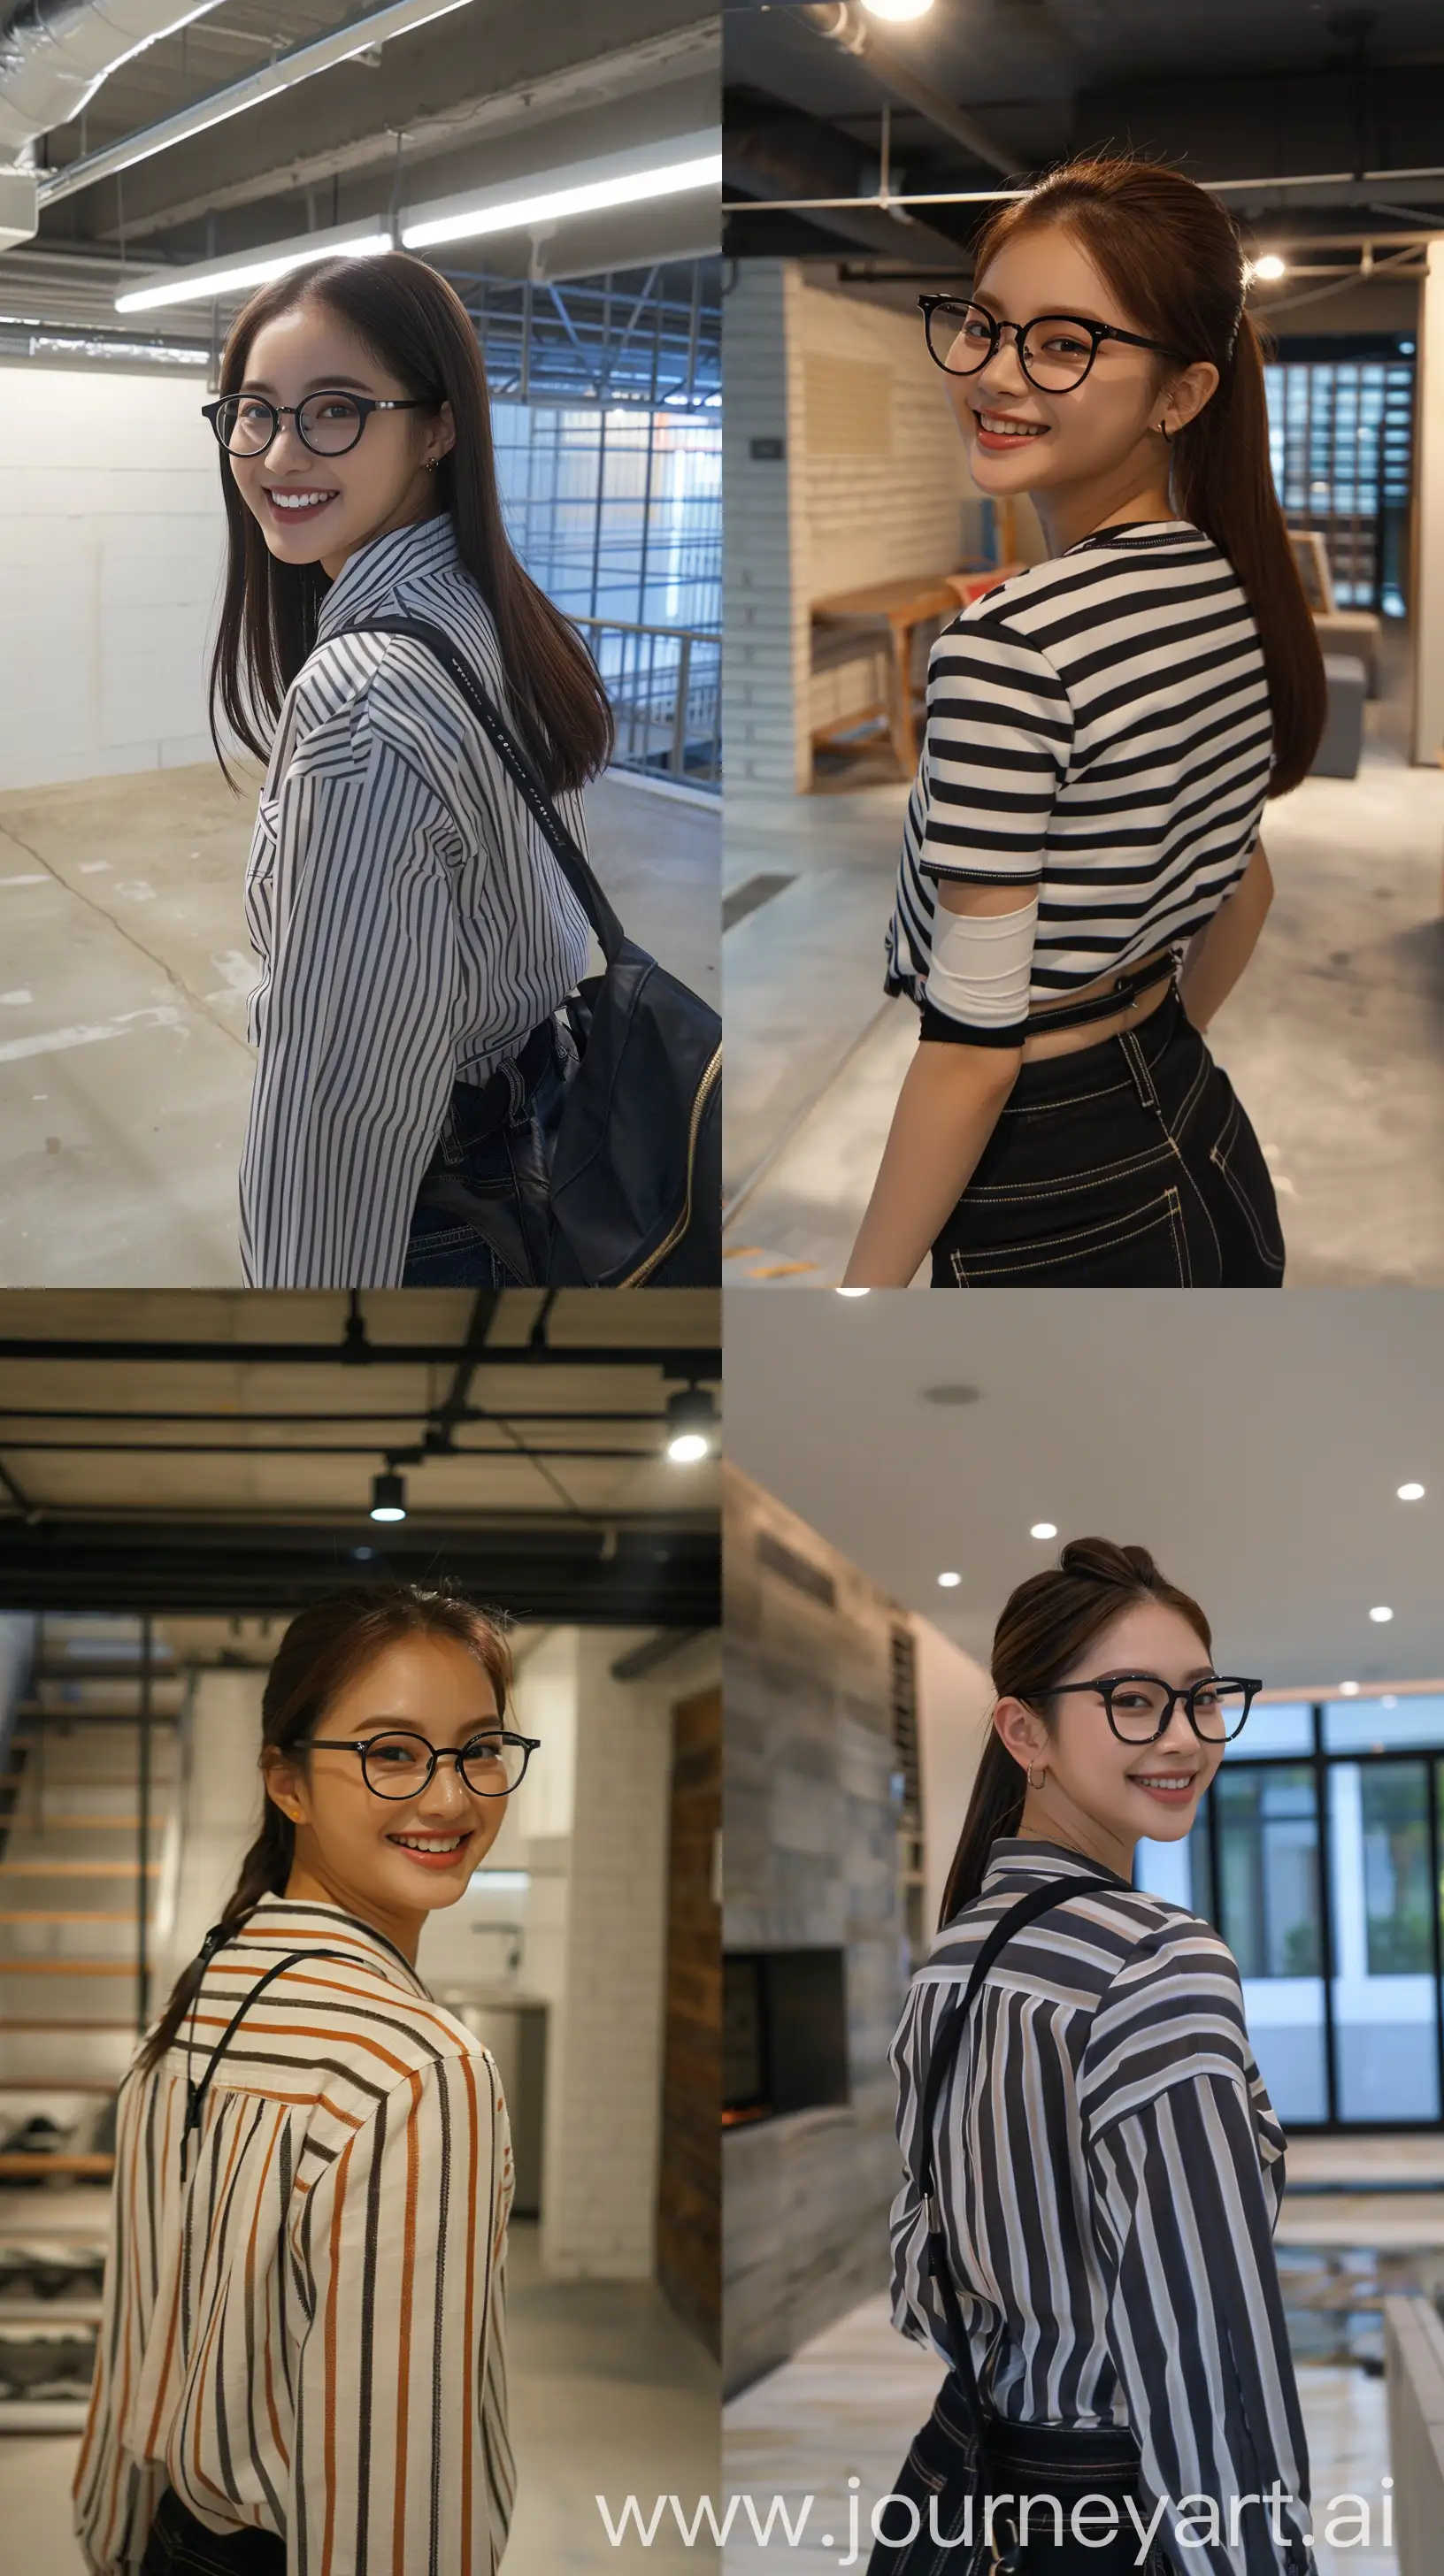 Smiling-Jennie-from-Blackpink-in-Striped-Shirt-and-Glasses-Walking-Inside-Modern-Basement